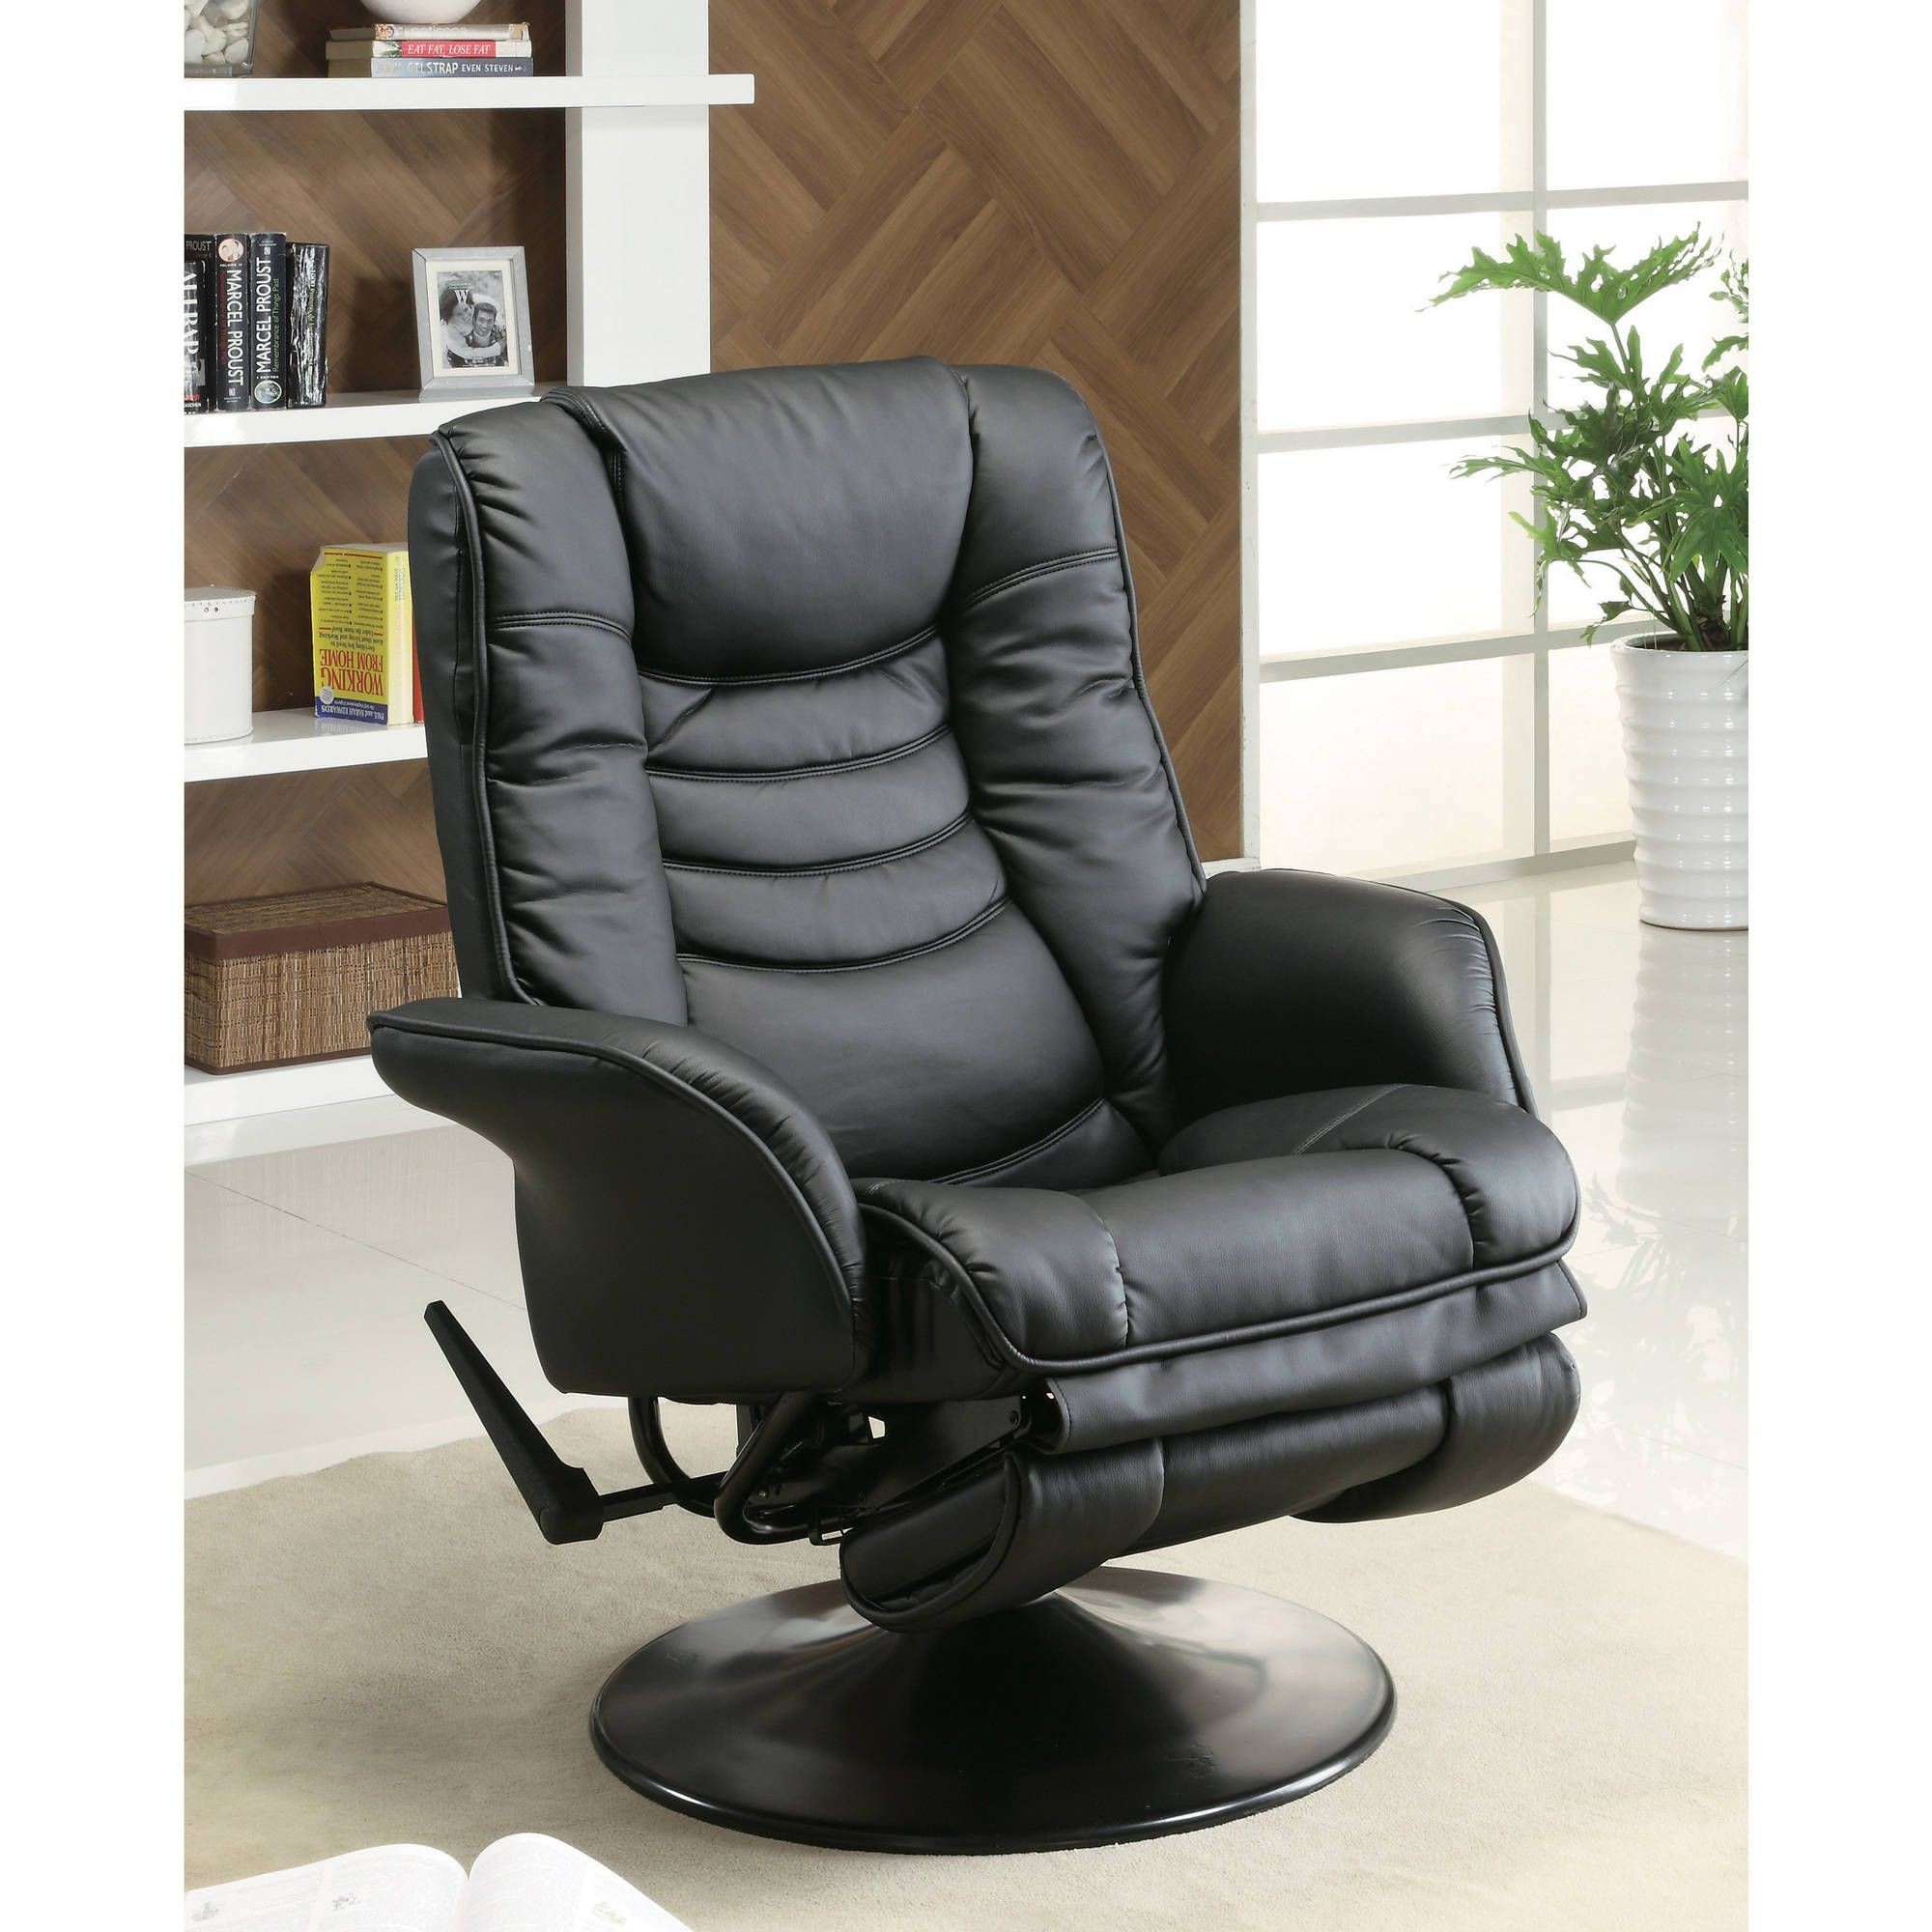 Leather Swivel Recliner Chair Reclining Black W Arms Footrest Lounge Oversized